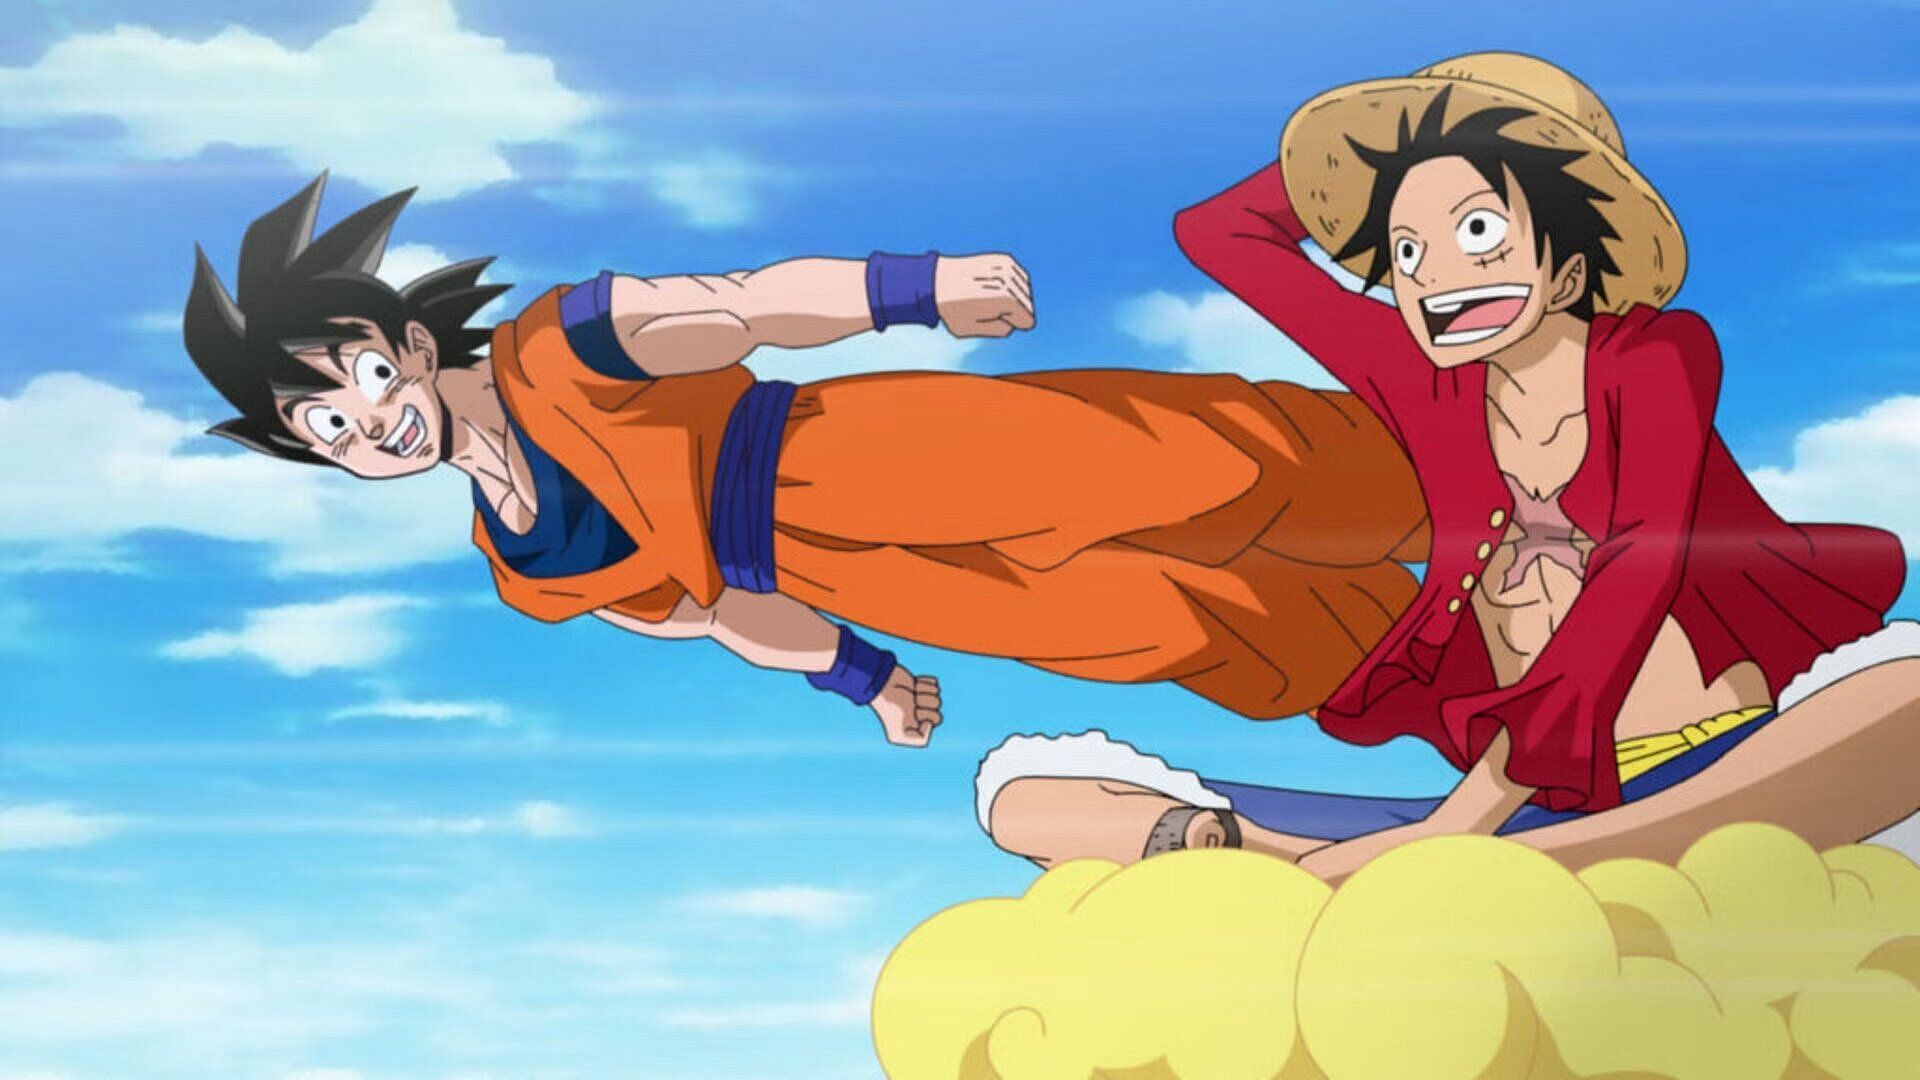 Goku and Luffy in a crossover (Image via Toei Animation).